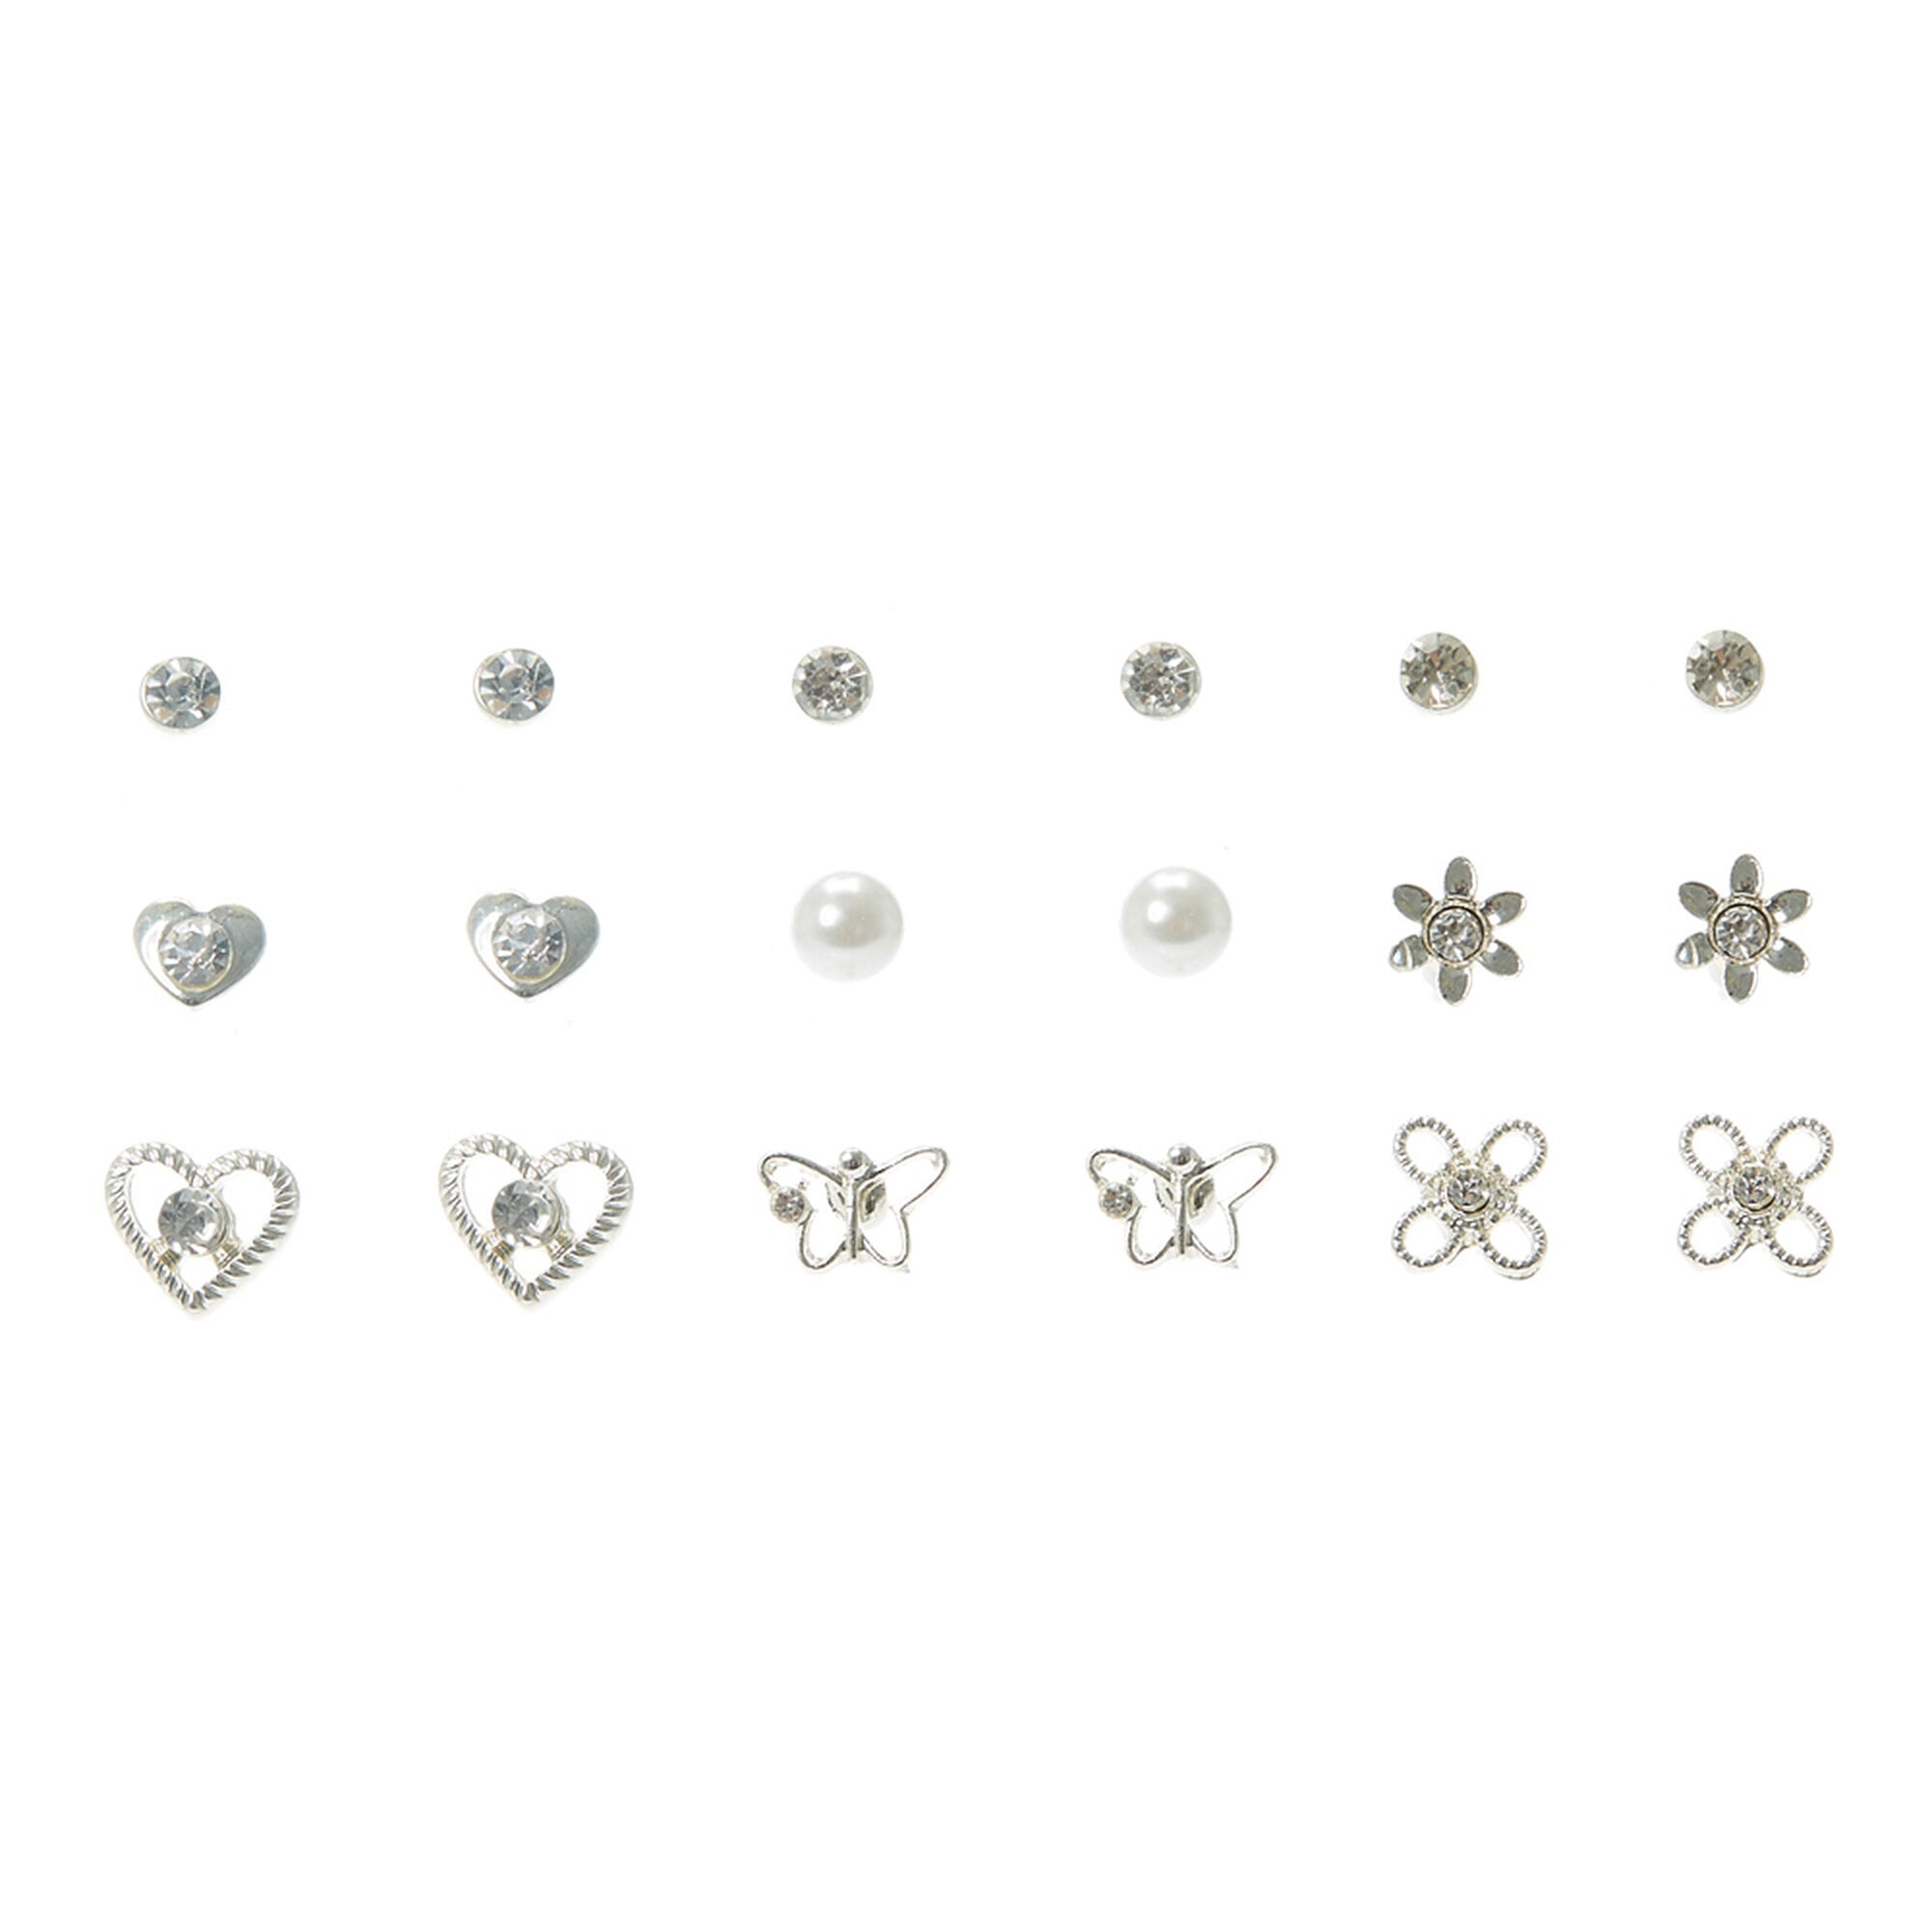 View Claires 9 Pack Tone Floral Pearl Crystal Stud Earrings Silver information